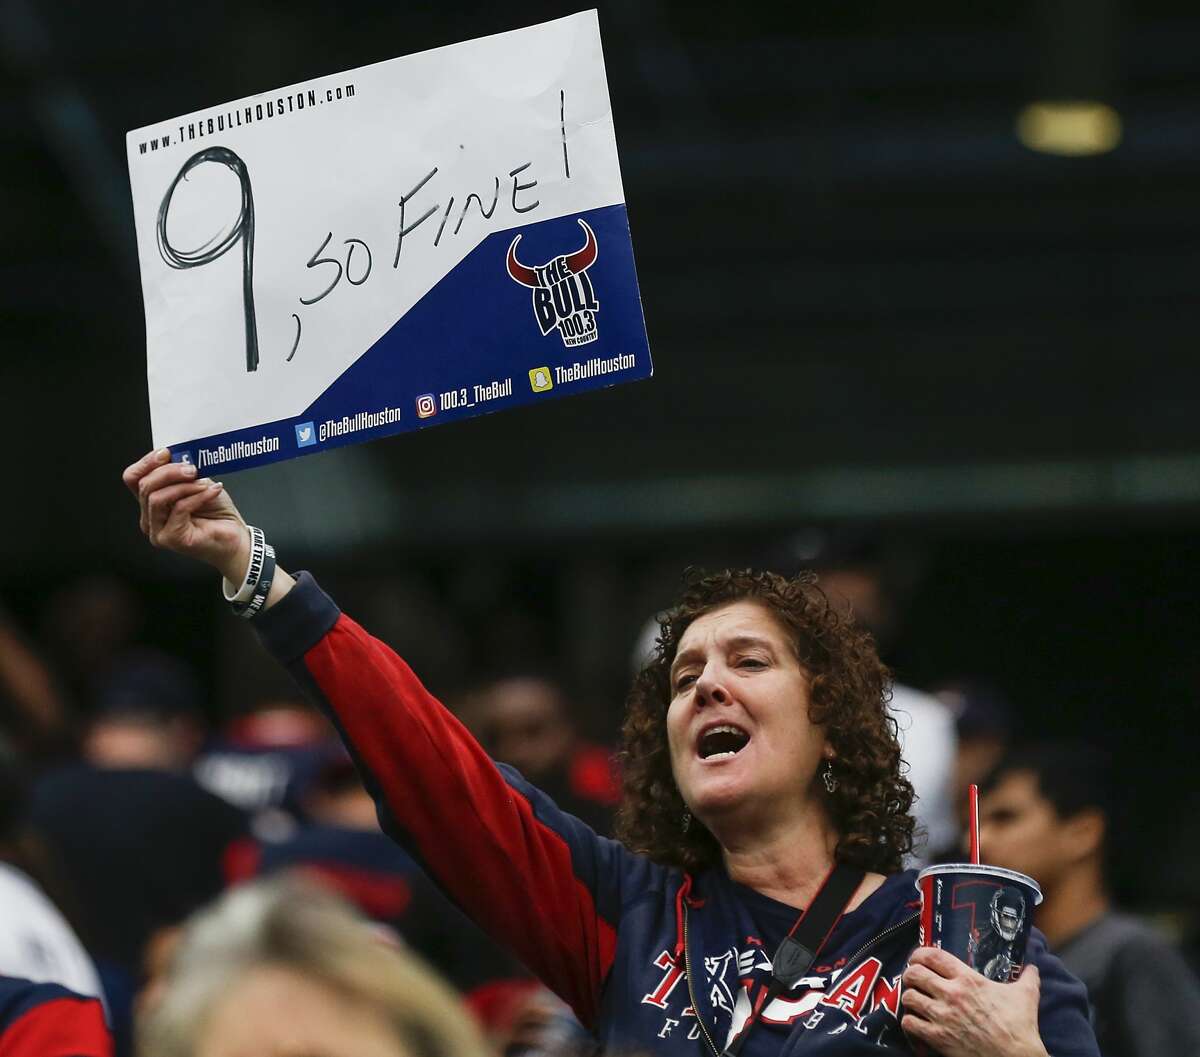 A Houston Texans fan holds up a sign signifying the Texans ninth consecutive win, a 29-13 win over the Cleveland Browns at NRG Stadium on Sunday, Dec. 2, 2018, in Houston.